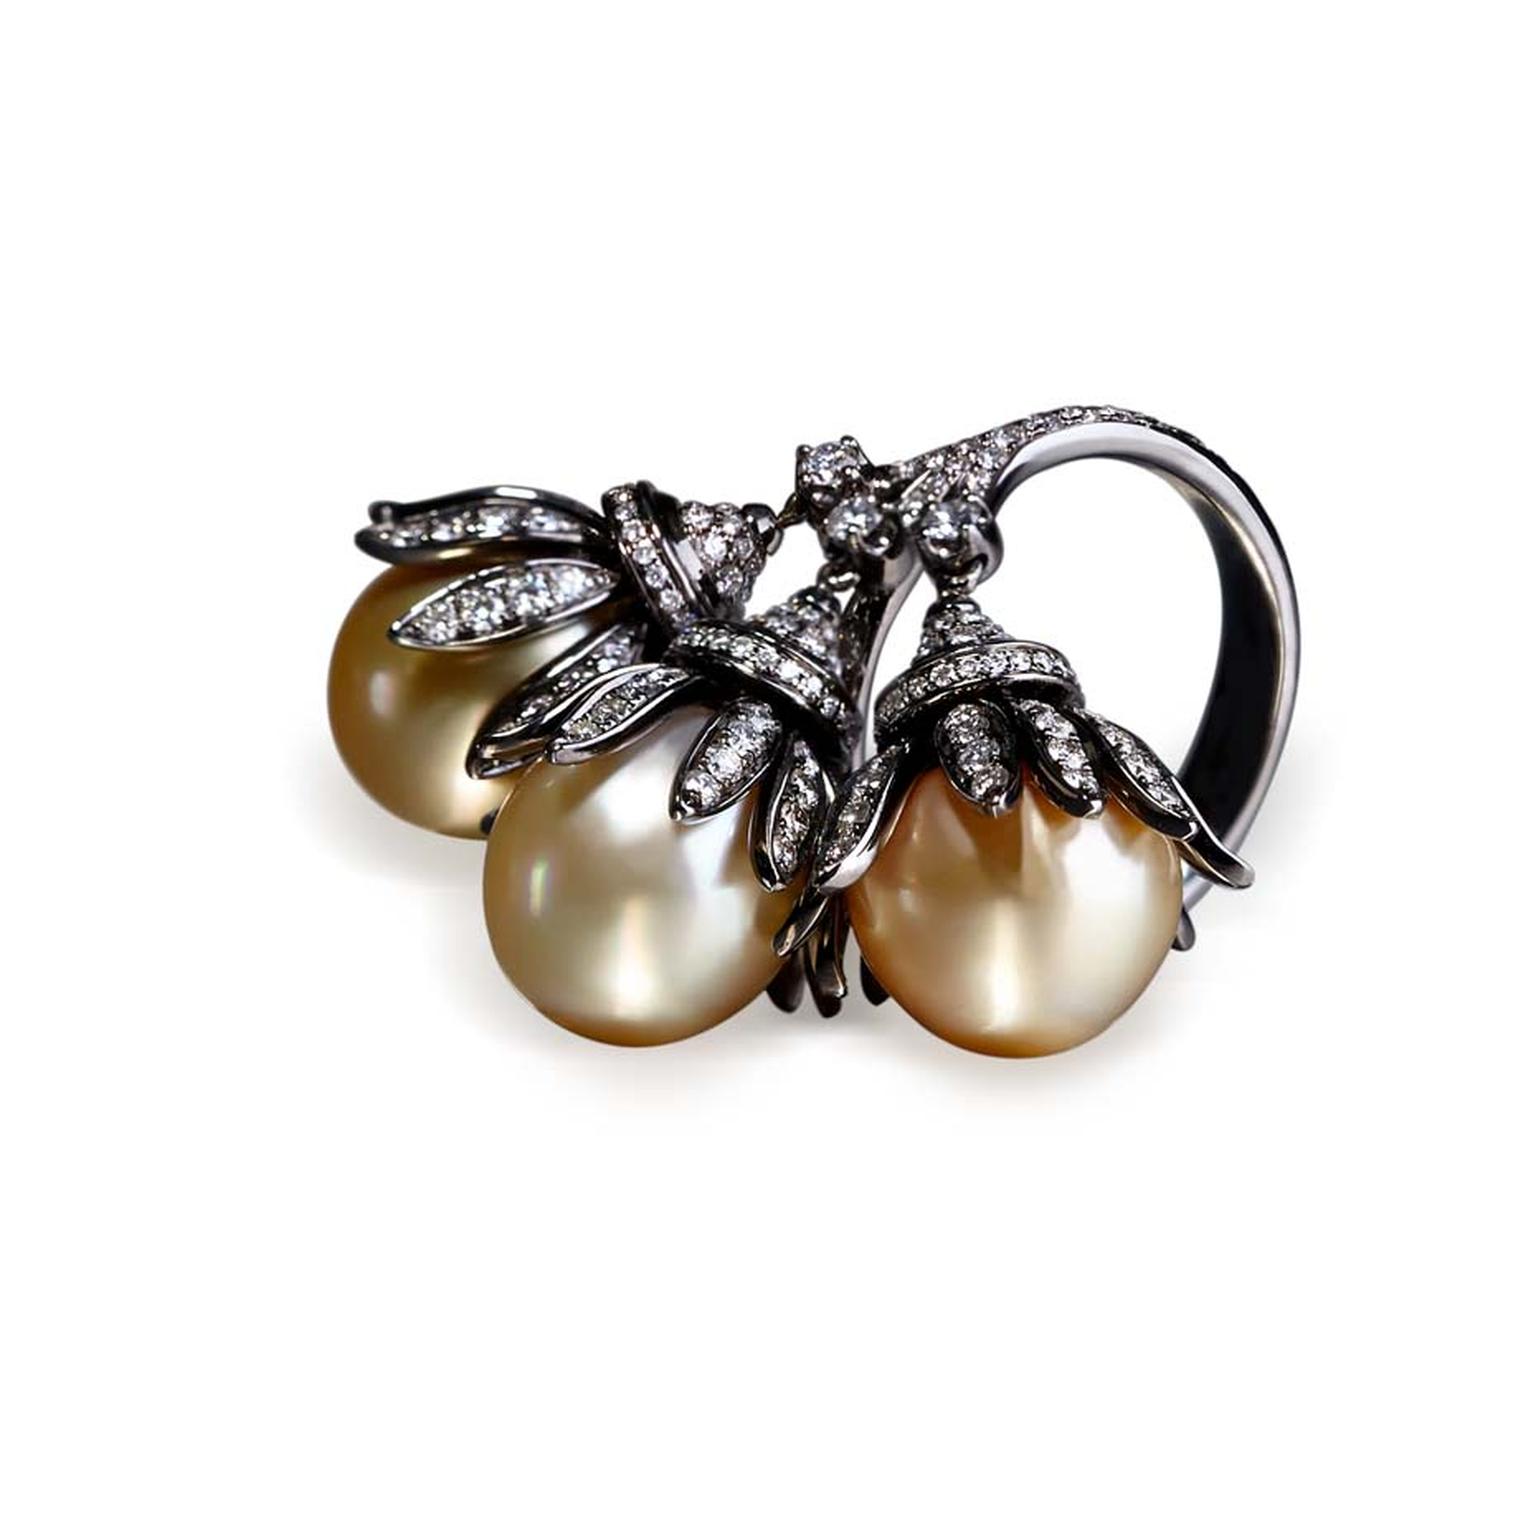 Annoushka Golden Pearls ring in black rhodium and white gold, set with rare South Sea pearls with a deep and perfectly unblemished golden lustre.